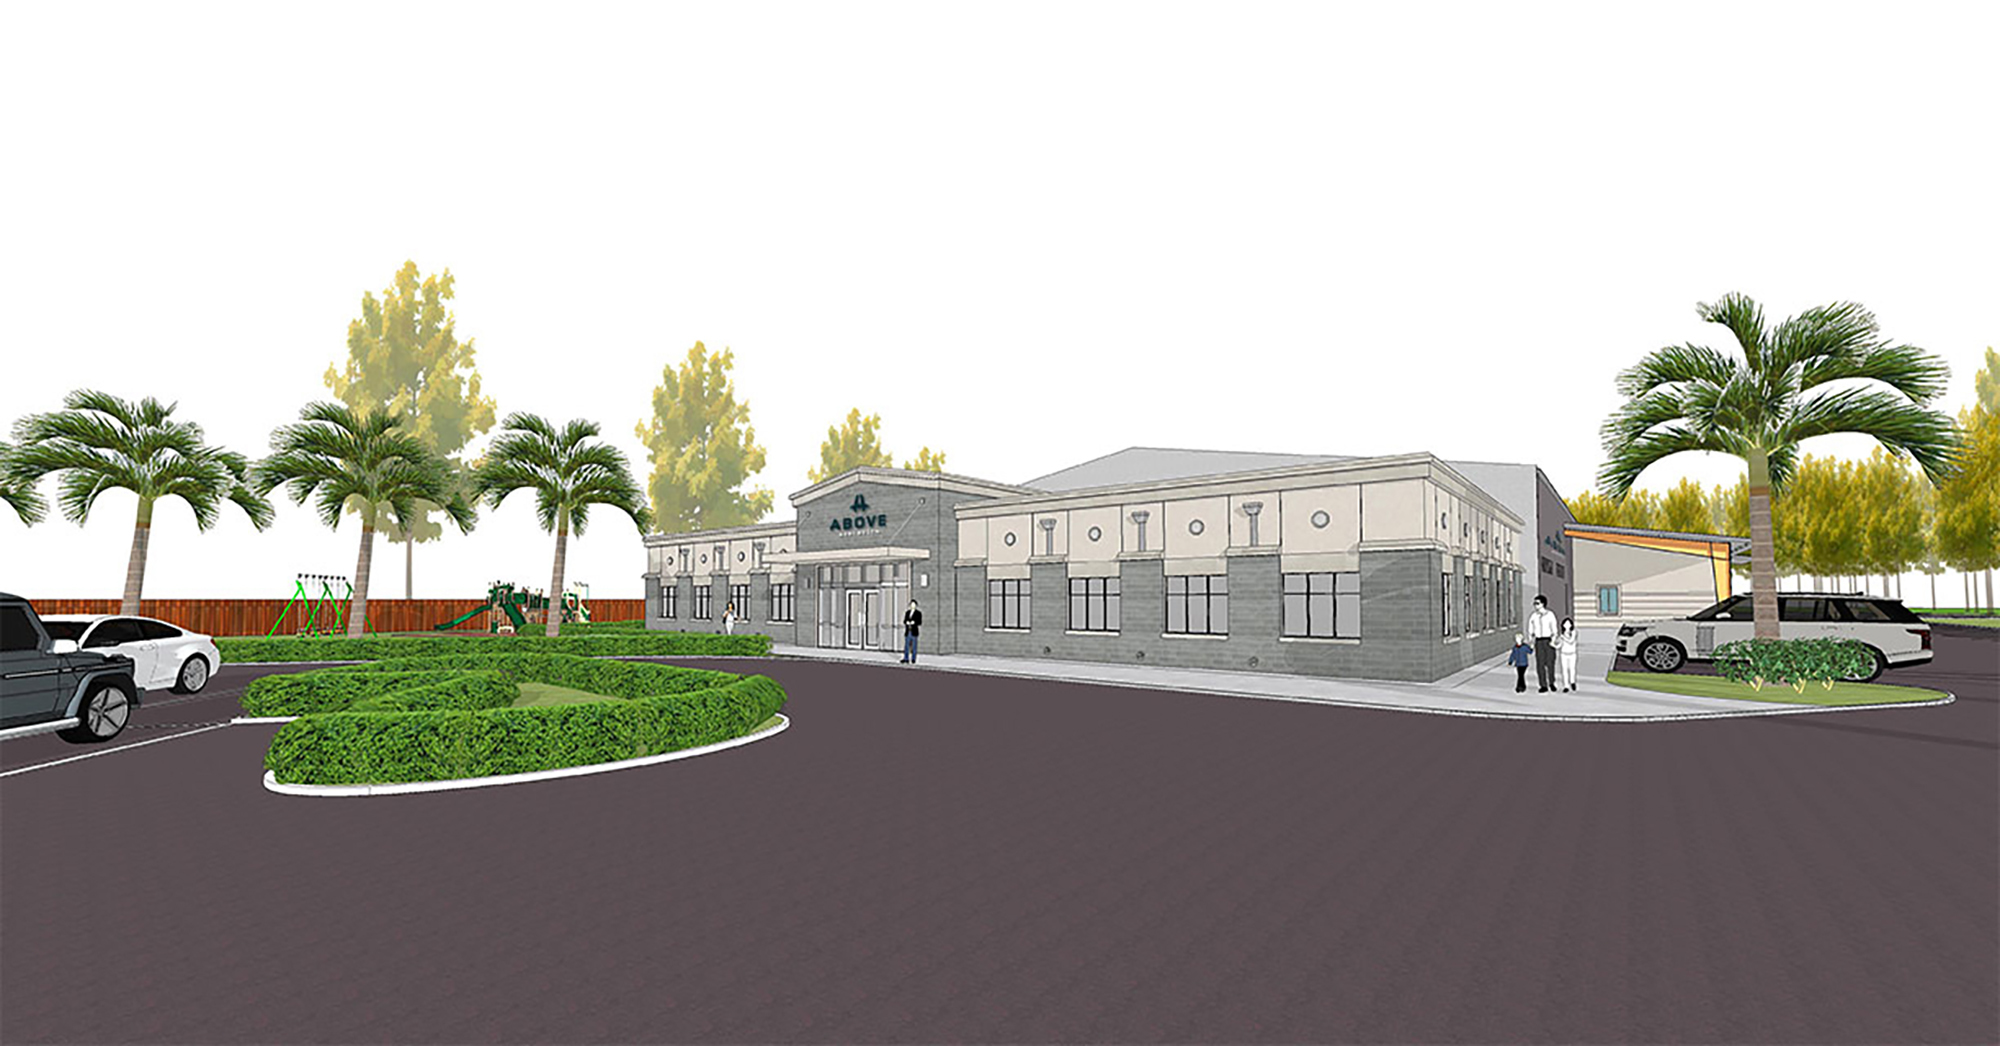 The Above Athletics Center is under development in southern Duval County, a quarter-mile from the St. Johns County line at 14797 Philips Highway.